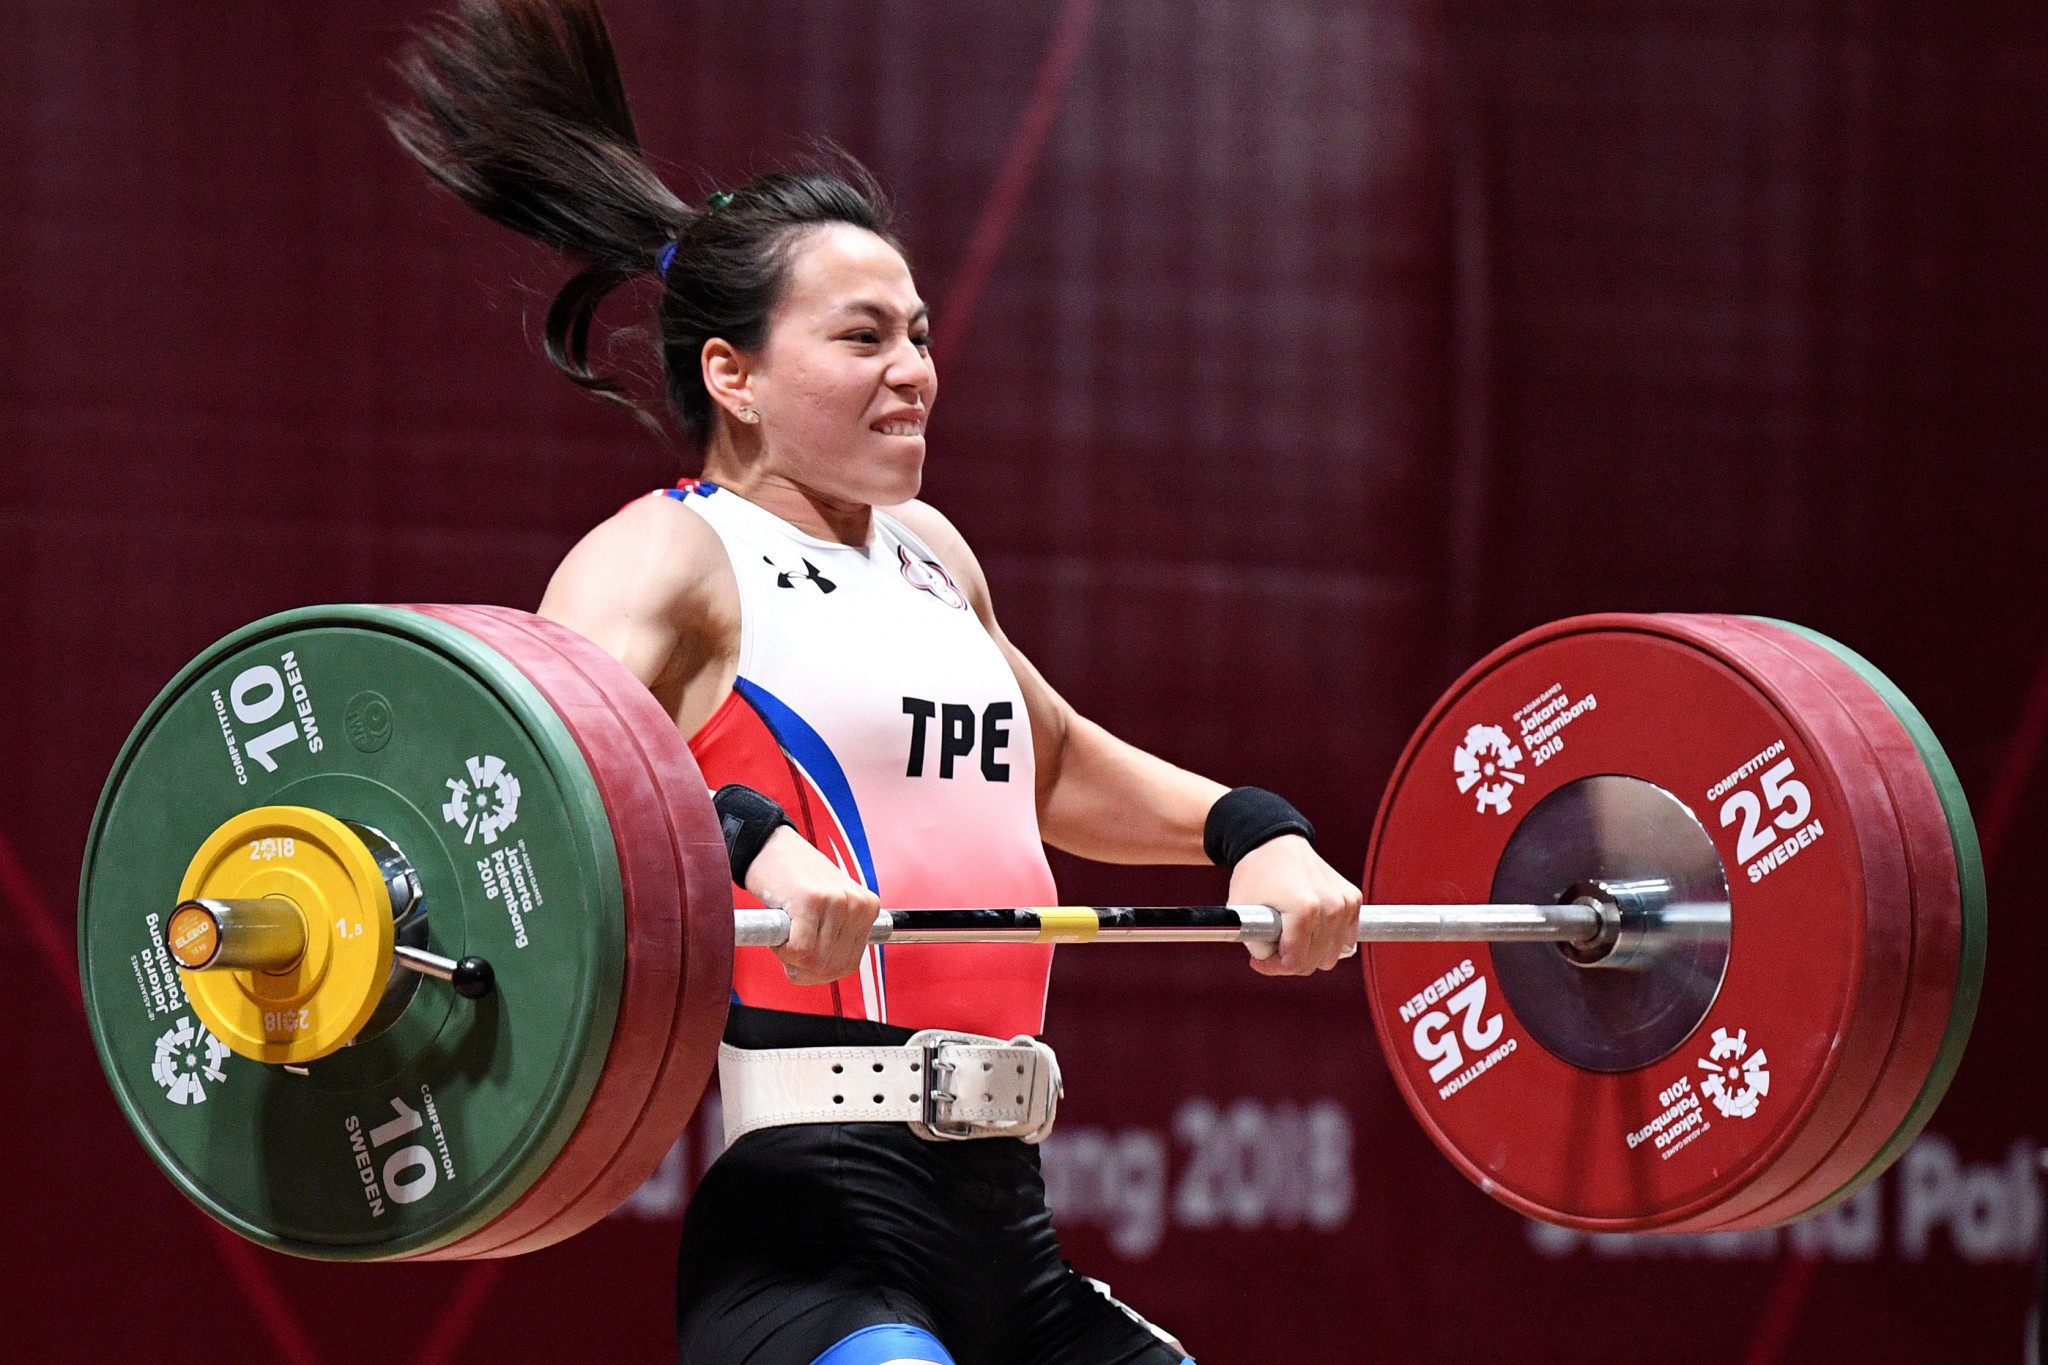 Chinese Taipei's Kuo Hsing-chun broke three world records en route to claiming the women's 59 kilograms title at the Asian Weightlifting Championships in Ningbo in China today ©Getty Images